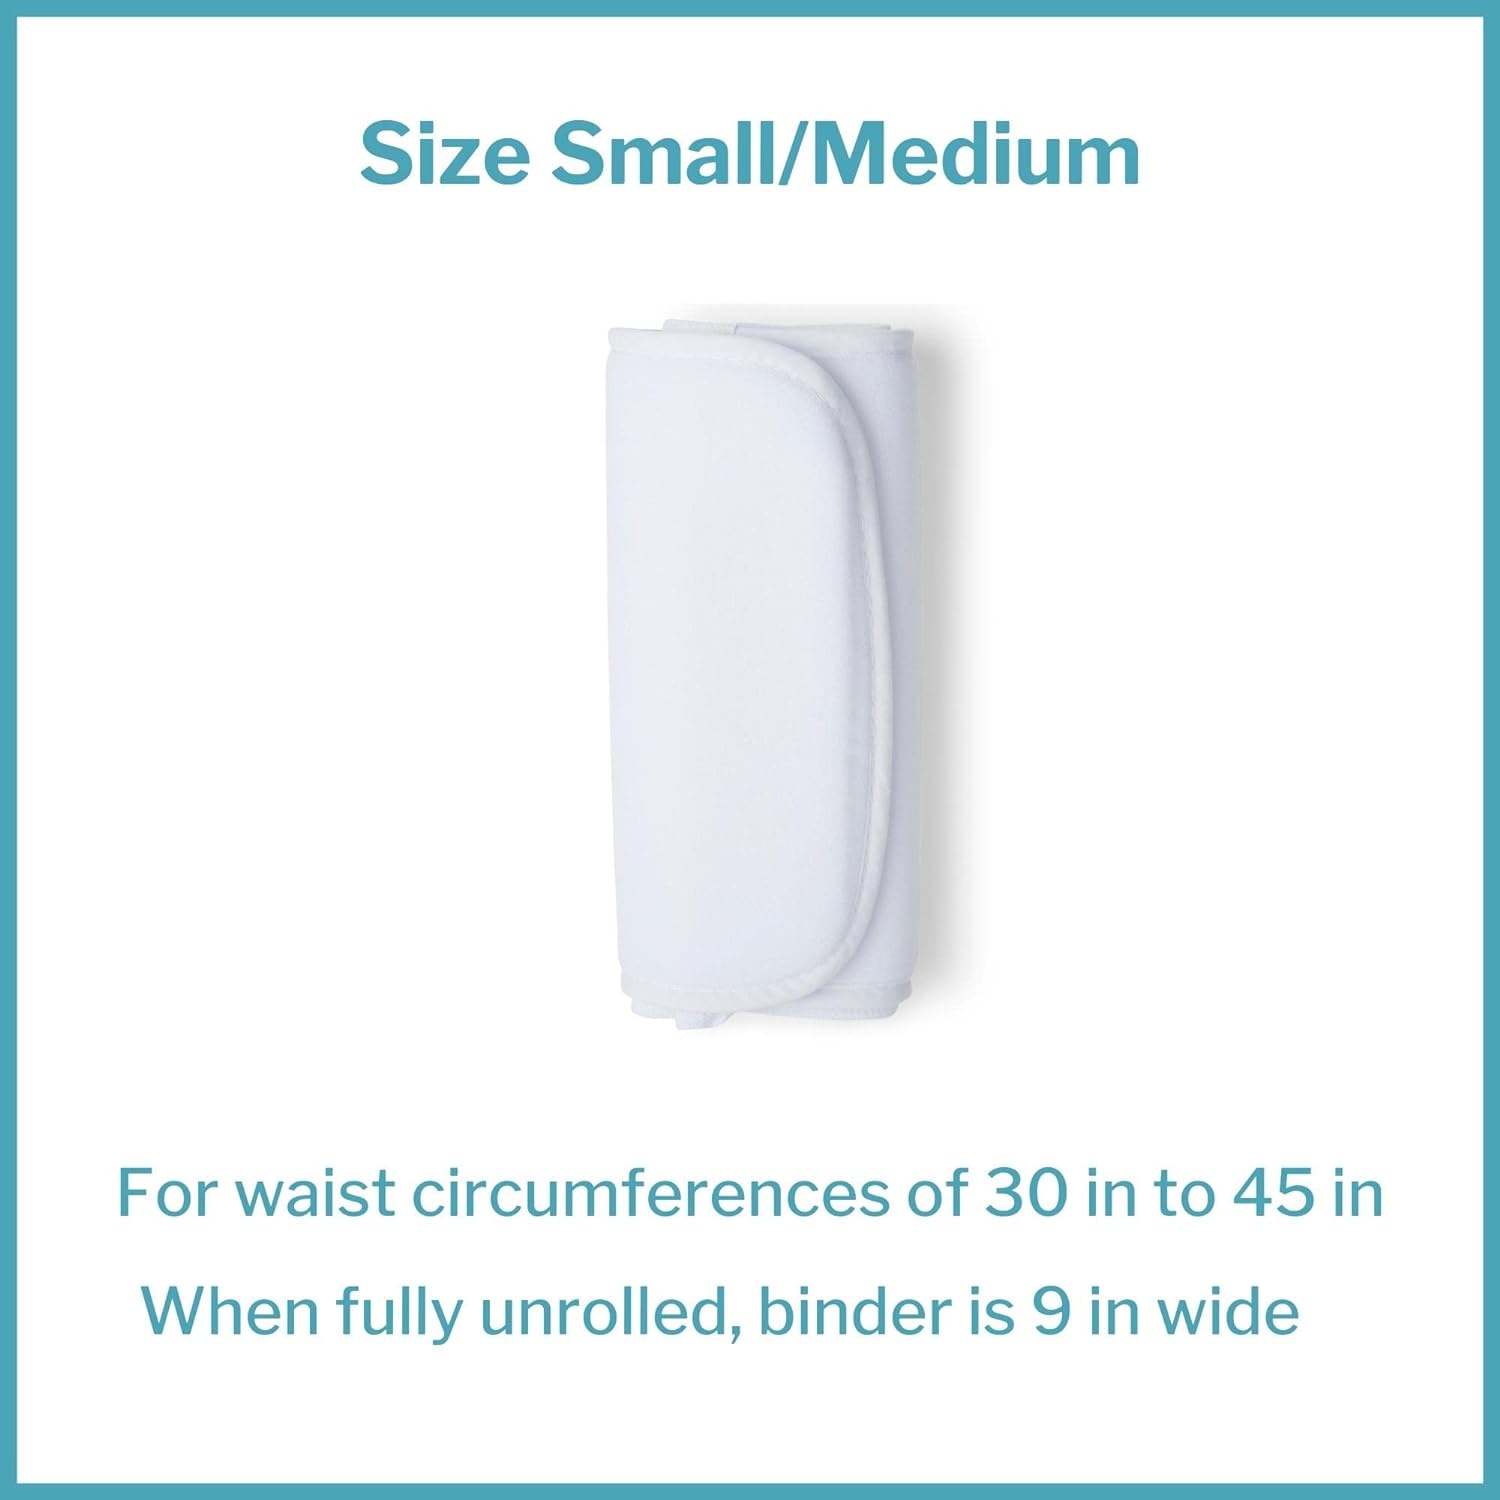 McKesson Small-Medium Abdominal Support Binder for Adults, 30 to 45 Inch Waist Circumference, 9 Inch", 1 Count